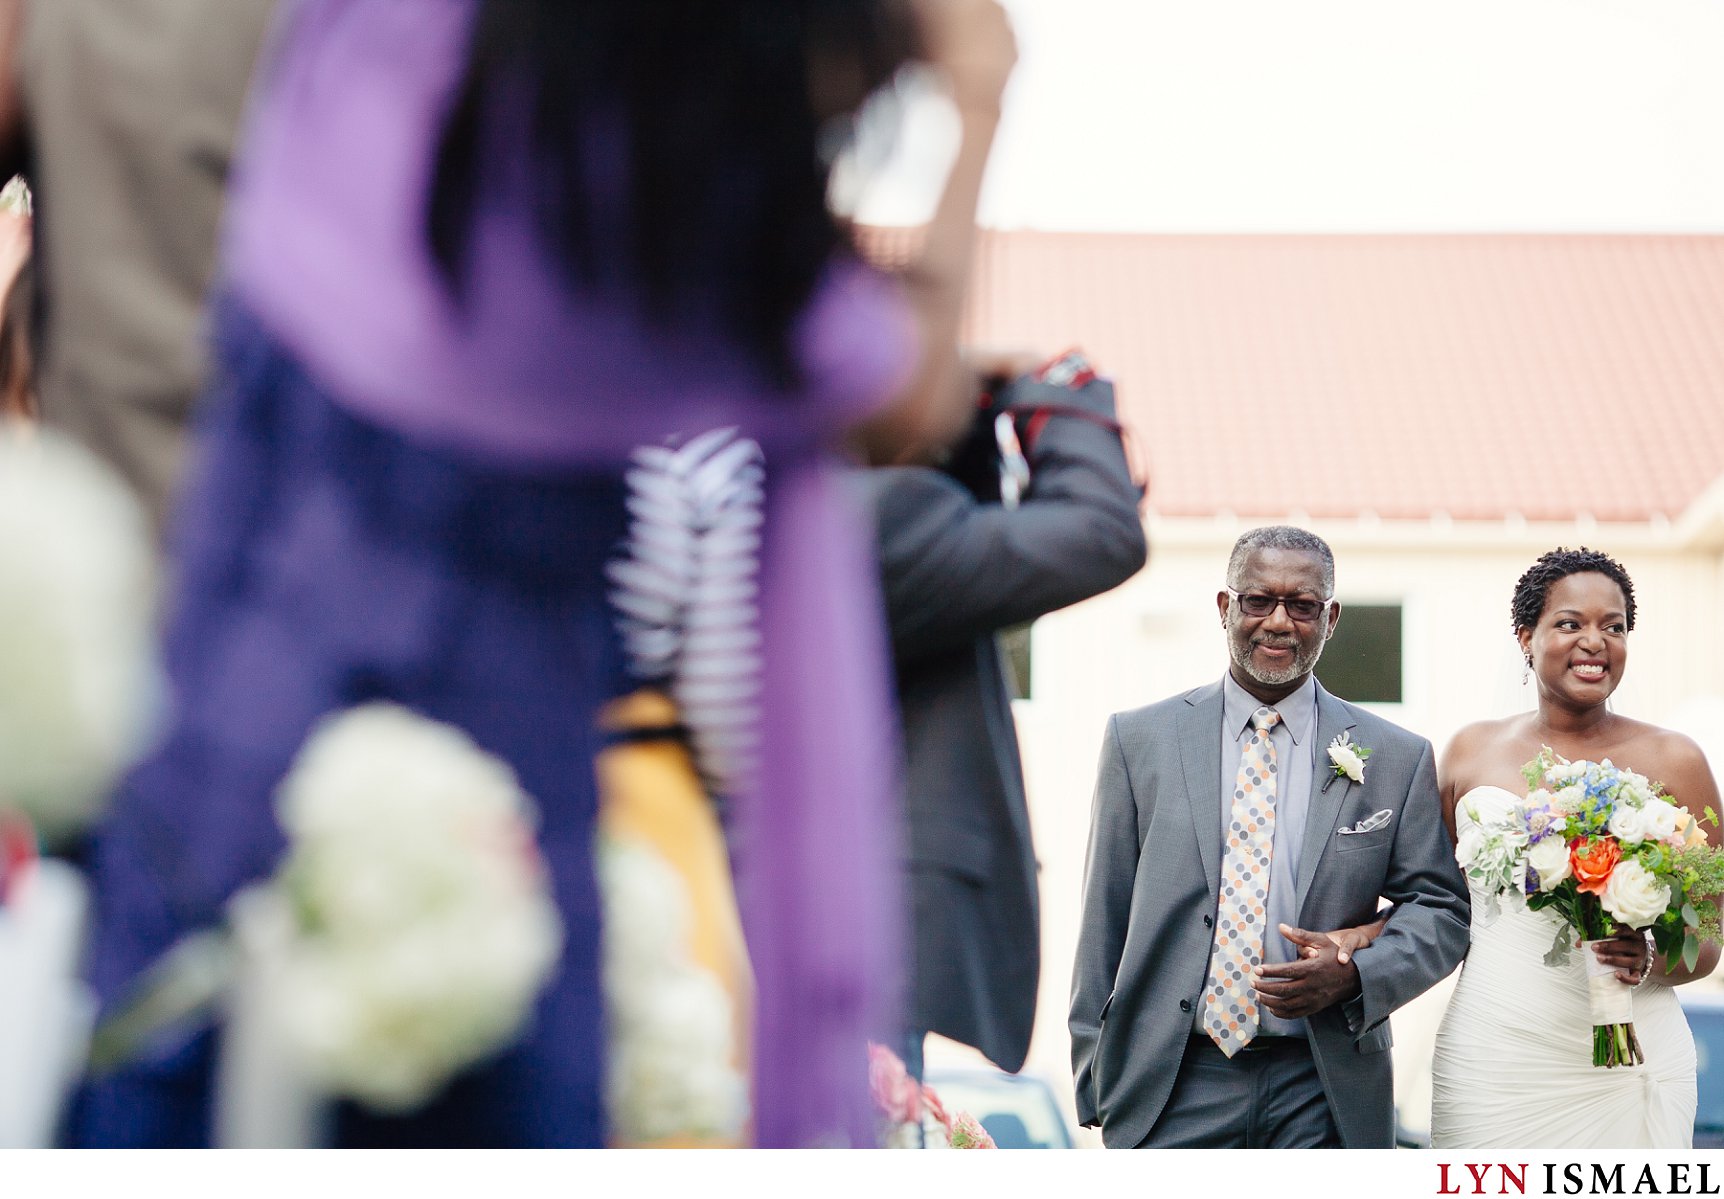 Bride walks down the aisle with her father at a Holland Marsh Wineries wedding.